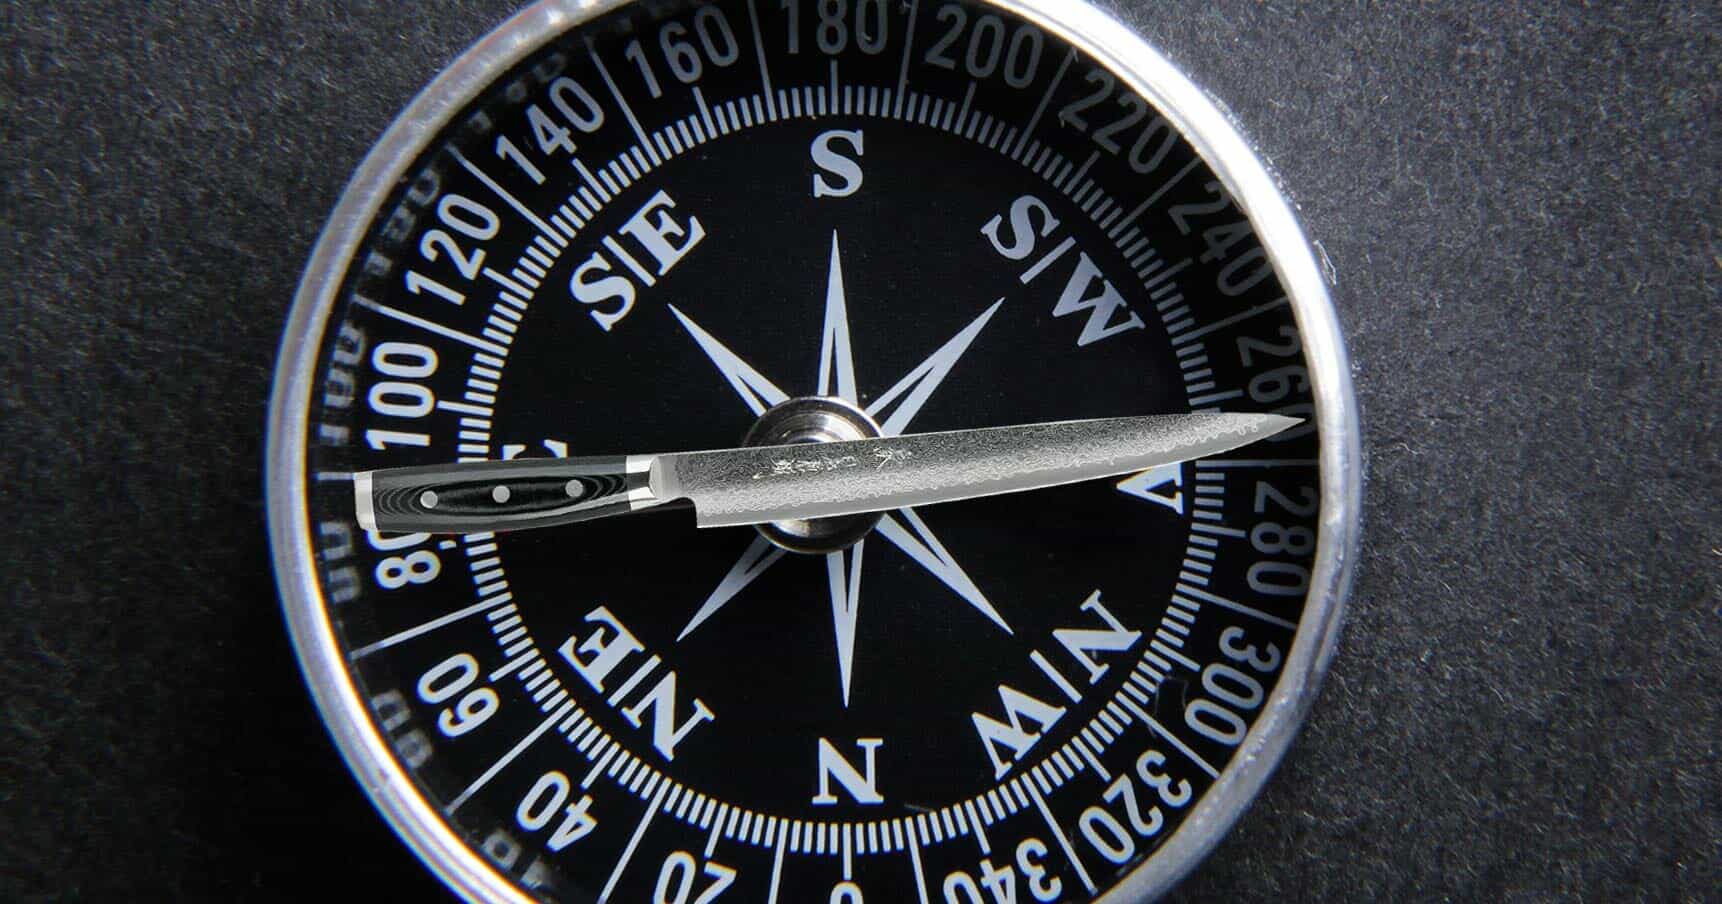 Custom graphic Yaxell Gou slicing knife being used as the needle on a compass in the East West position. 